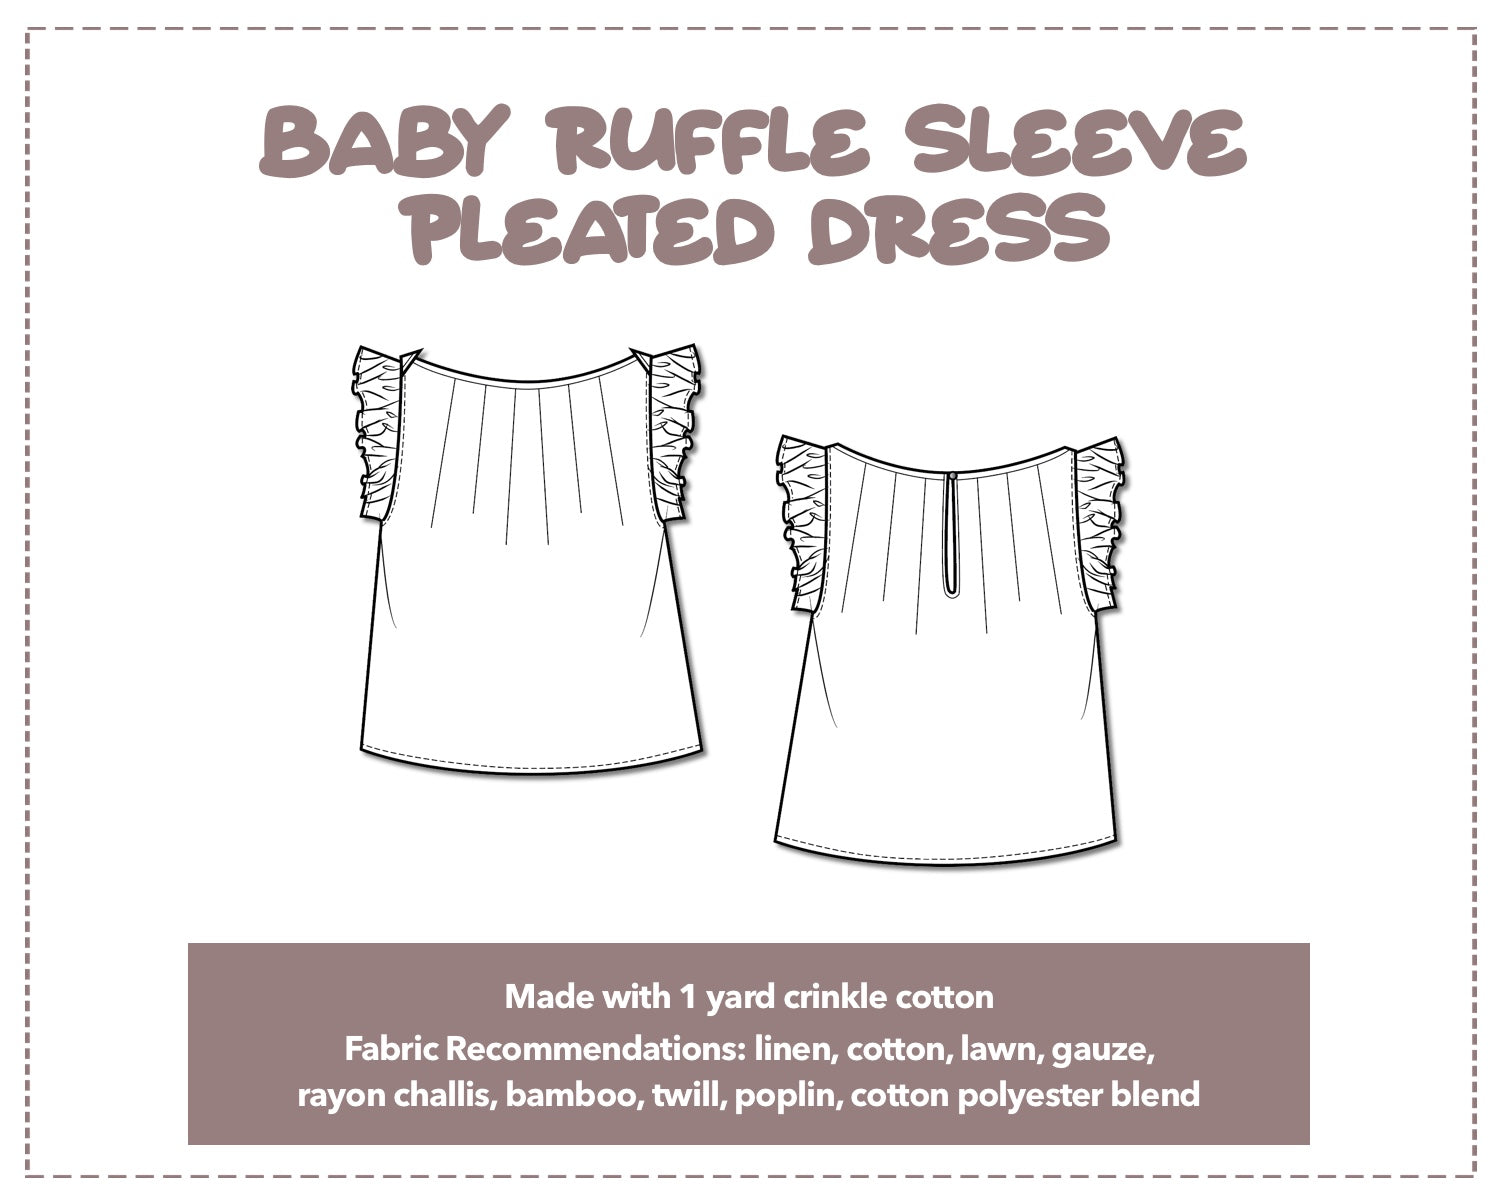 Illustration and detailed description for Baby Ruffle Sleeve Pleated Dress sewing pattern.